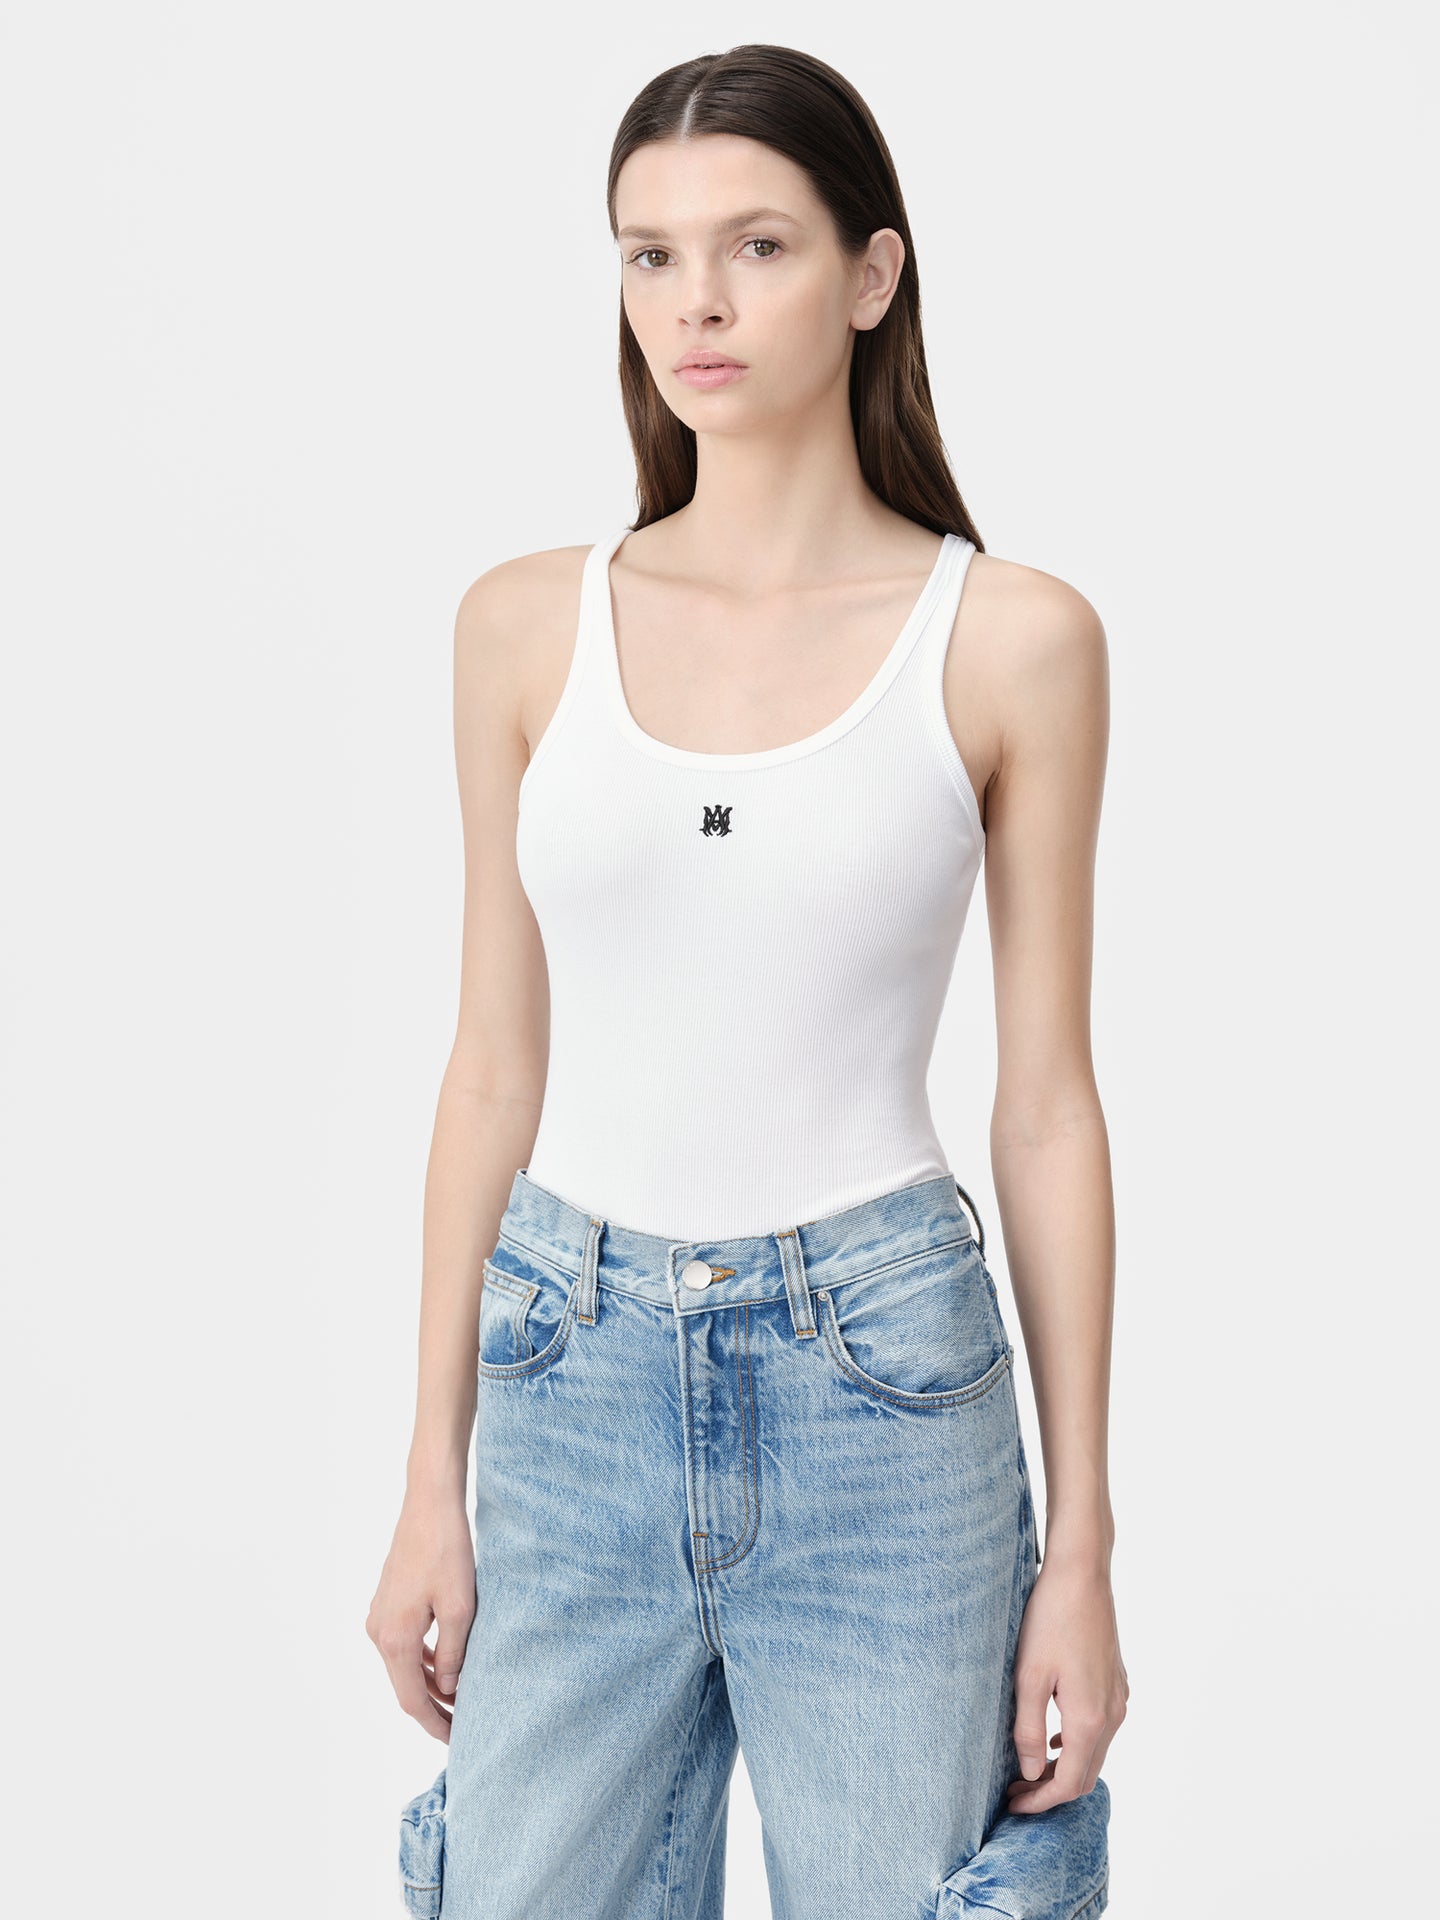 WOMEN - MA EMBROIDERED RIBBED TANK - White